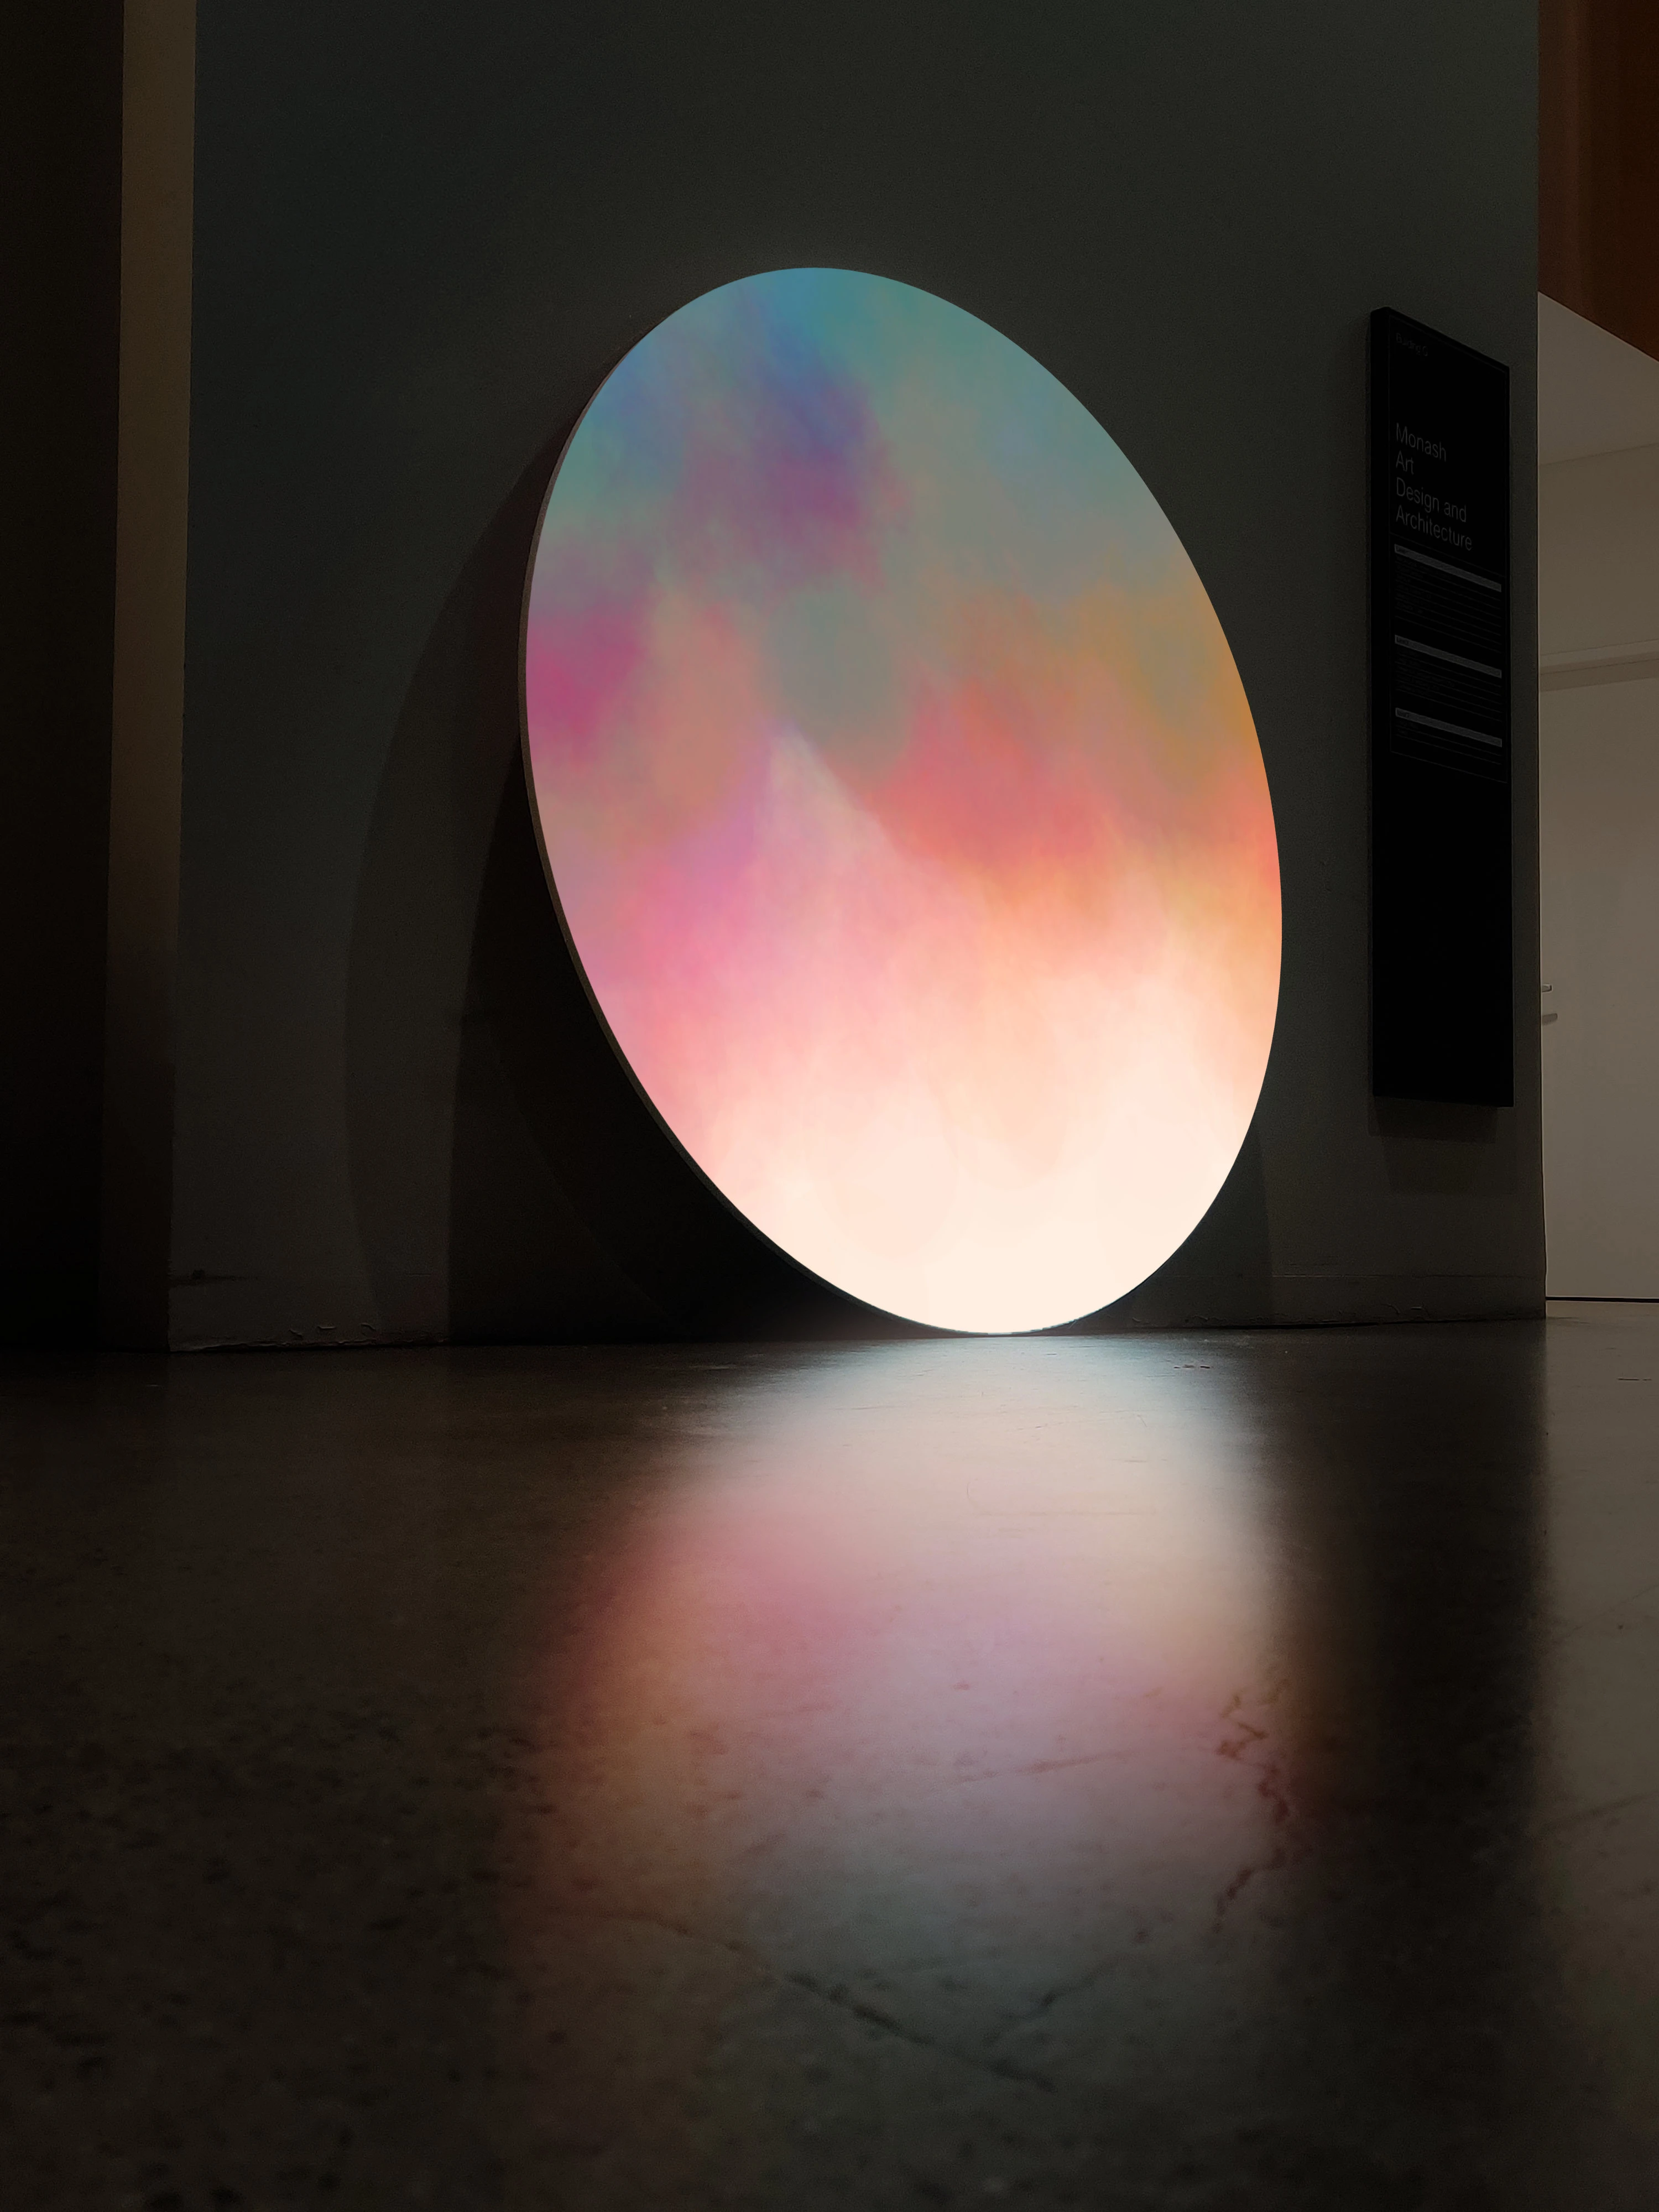 Side photo of the artwork, reflecting on the polished concrete like a full moon.